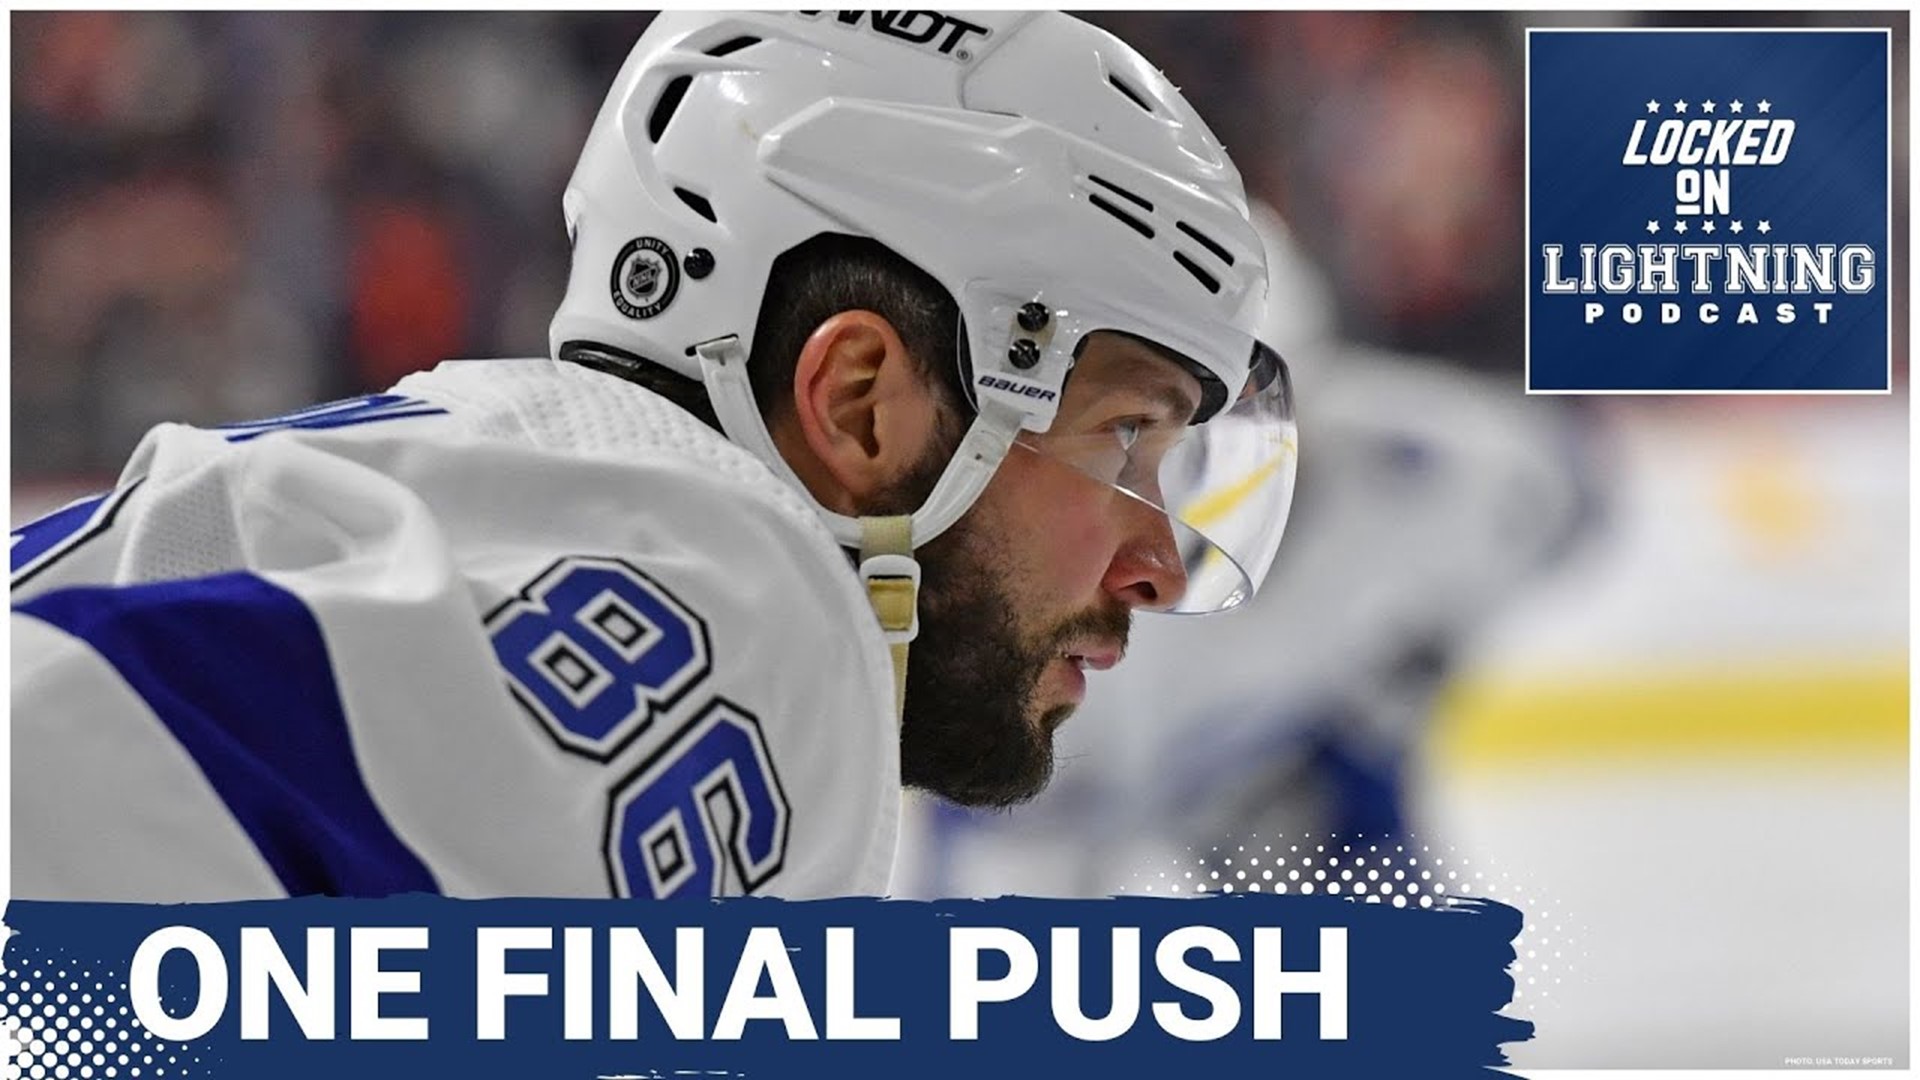 The Bolts will begin their final stretch to the end of the regular season as they will face off against the New York Rangers tomorrow night